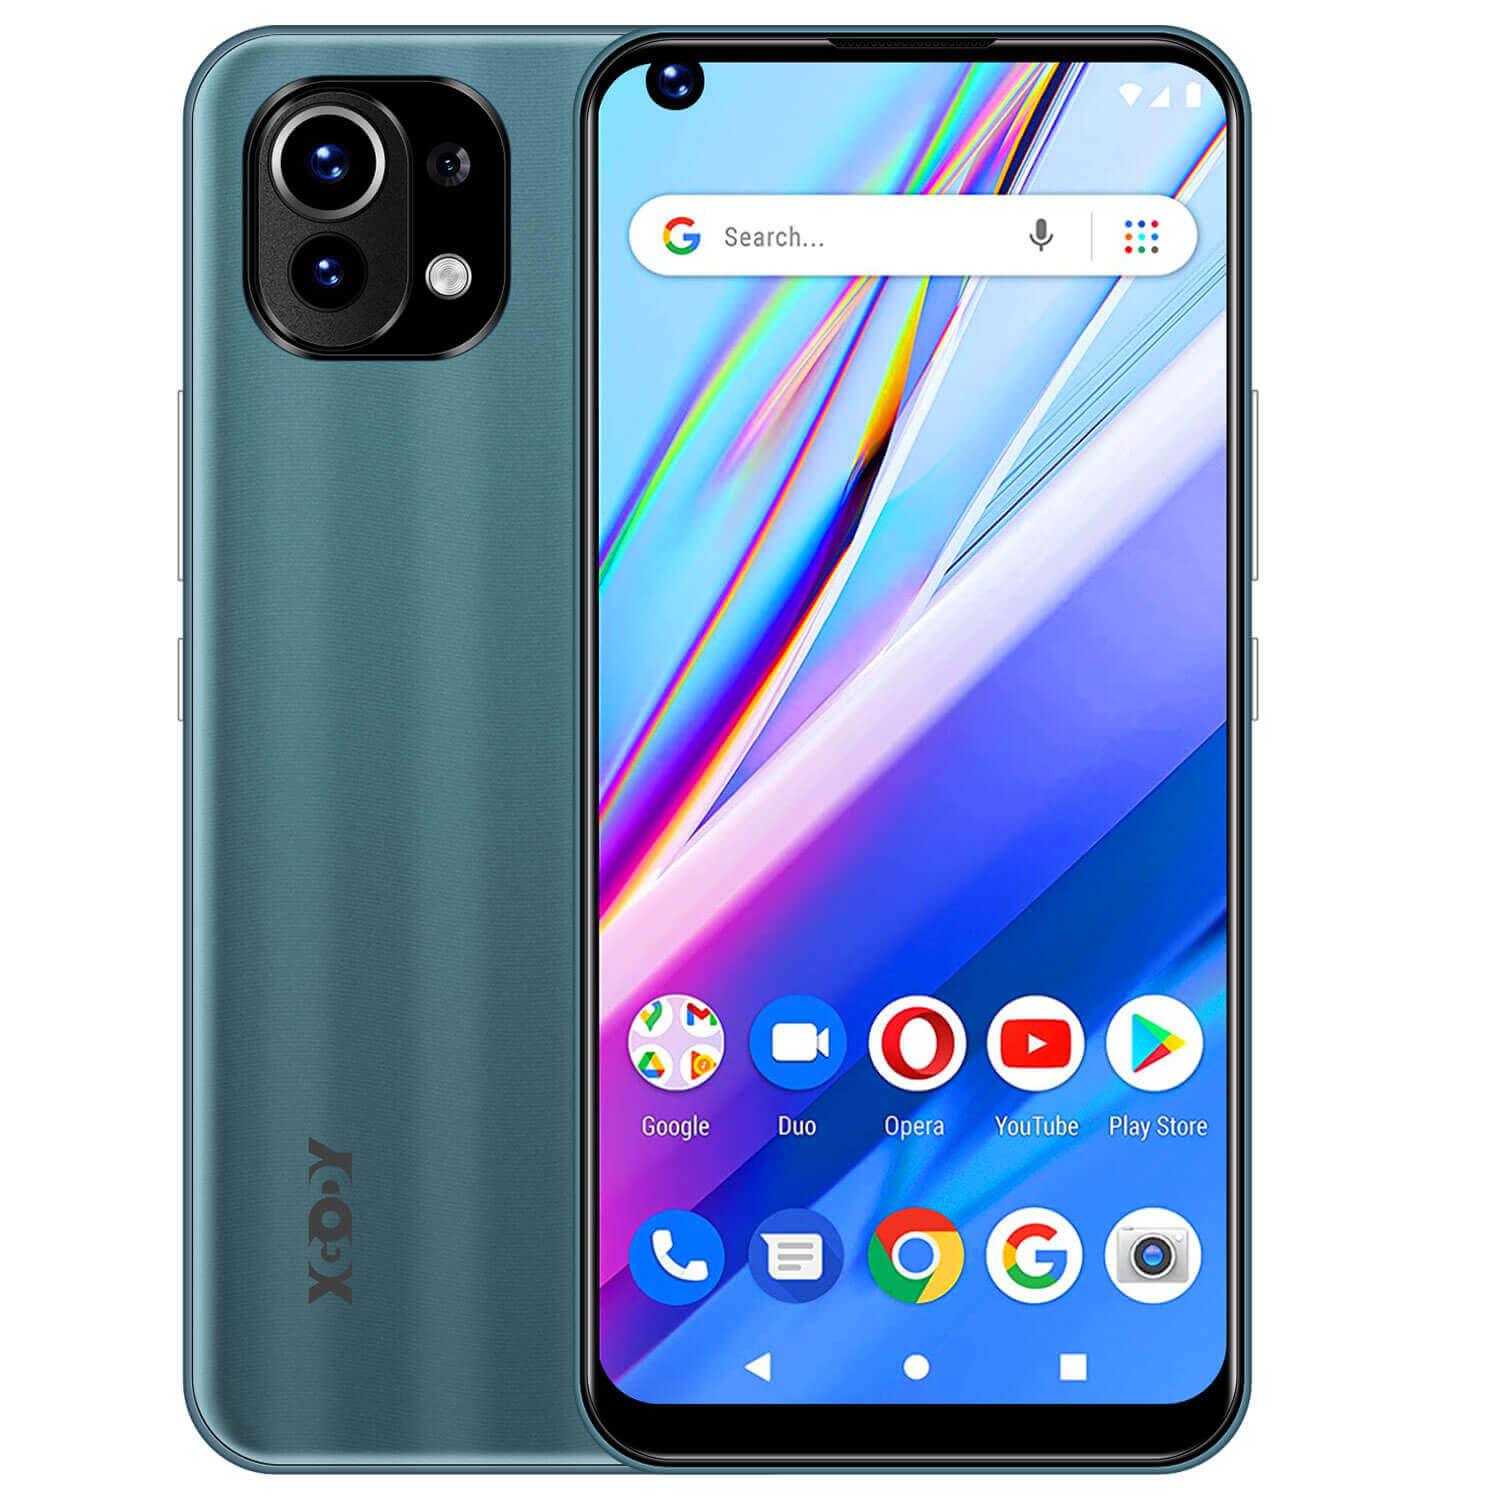 Cost-effective and Most worthwhile XGODY K40 Pro Global Unlocked Large Screen Android Smartphone With Dual SIM Quad Core Face ID Multi-Language - XGODY 